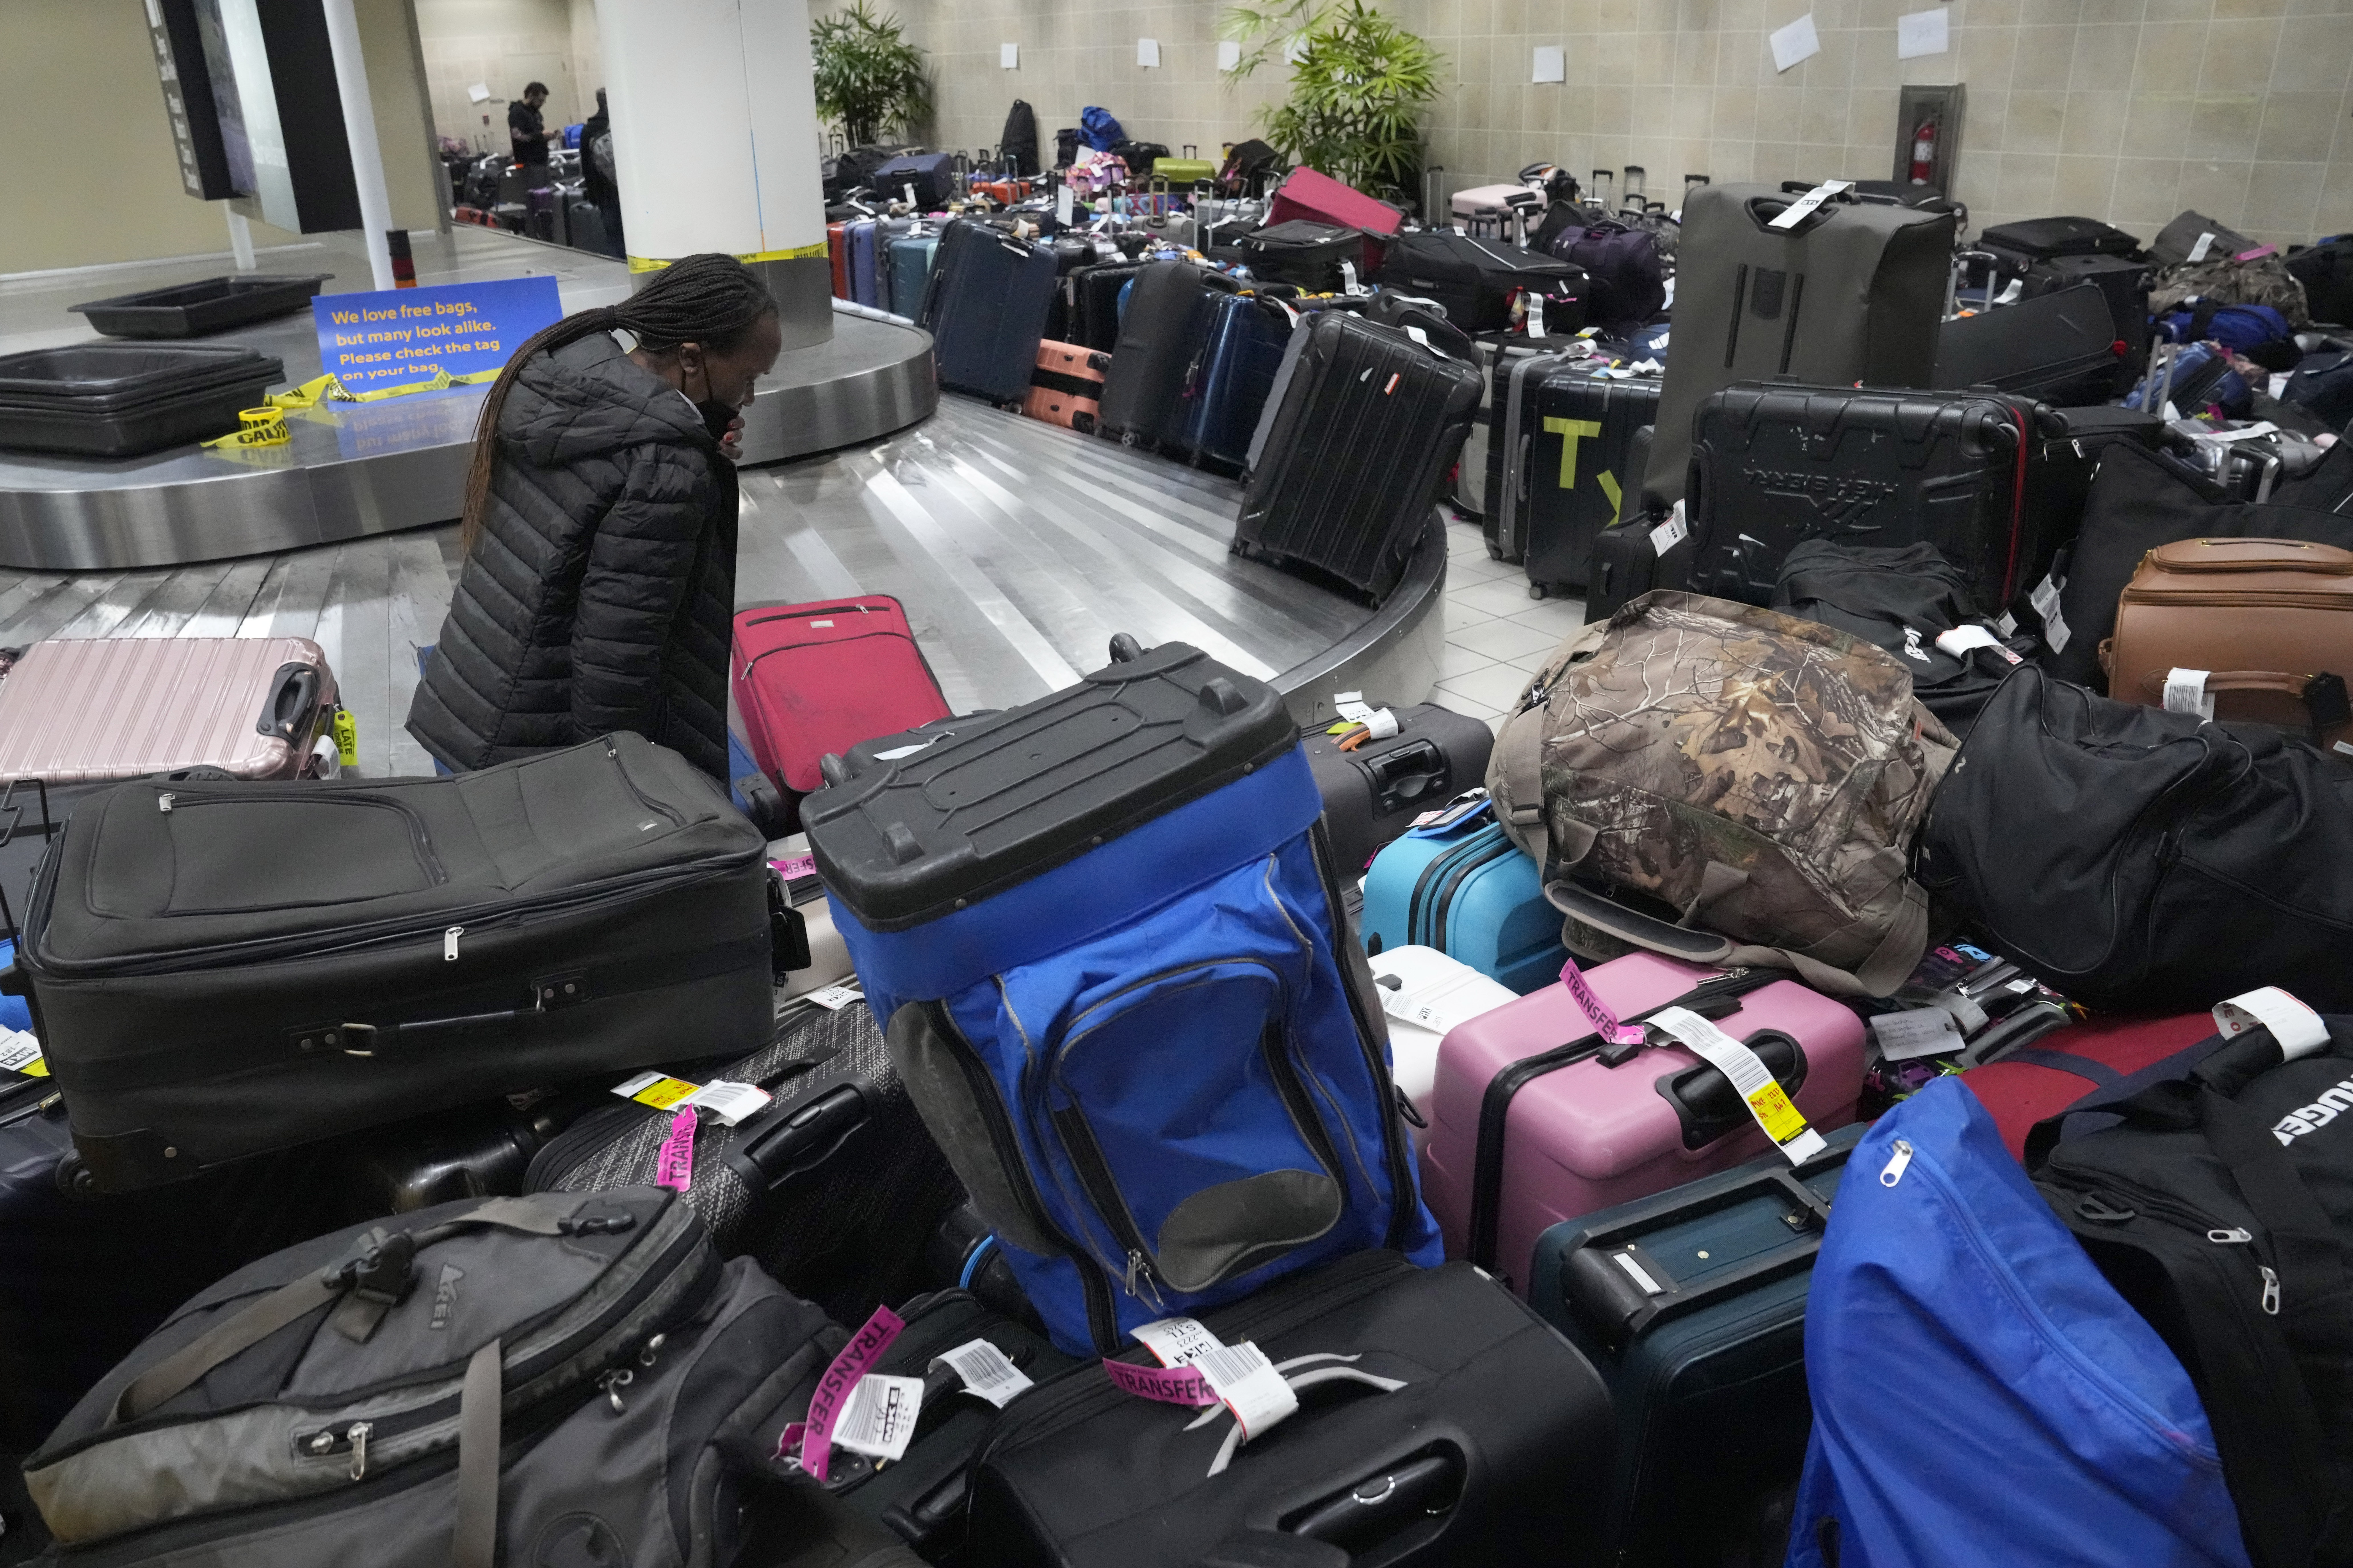 Unacceptable': Southwest flight chaos and cancellations lead to US inquiry, US news